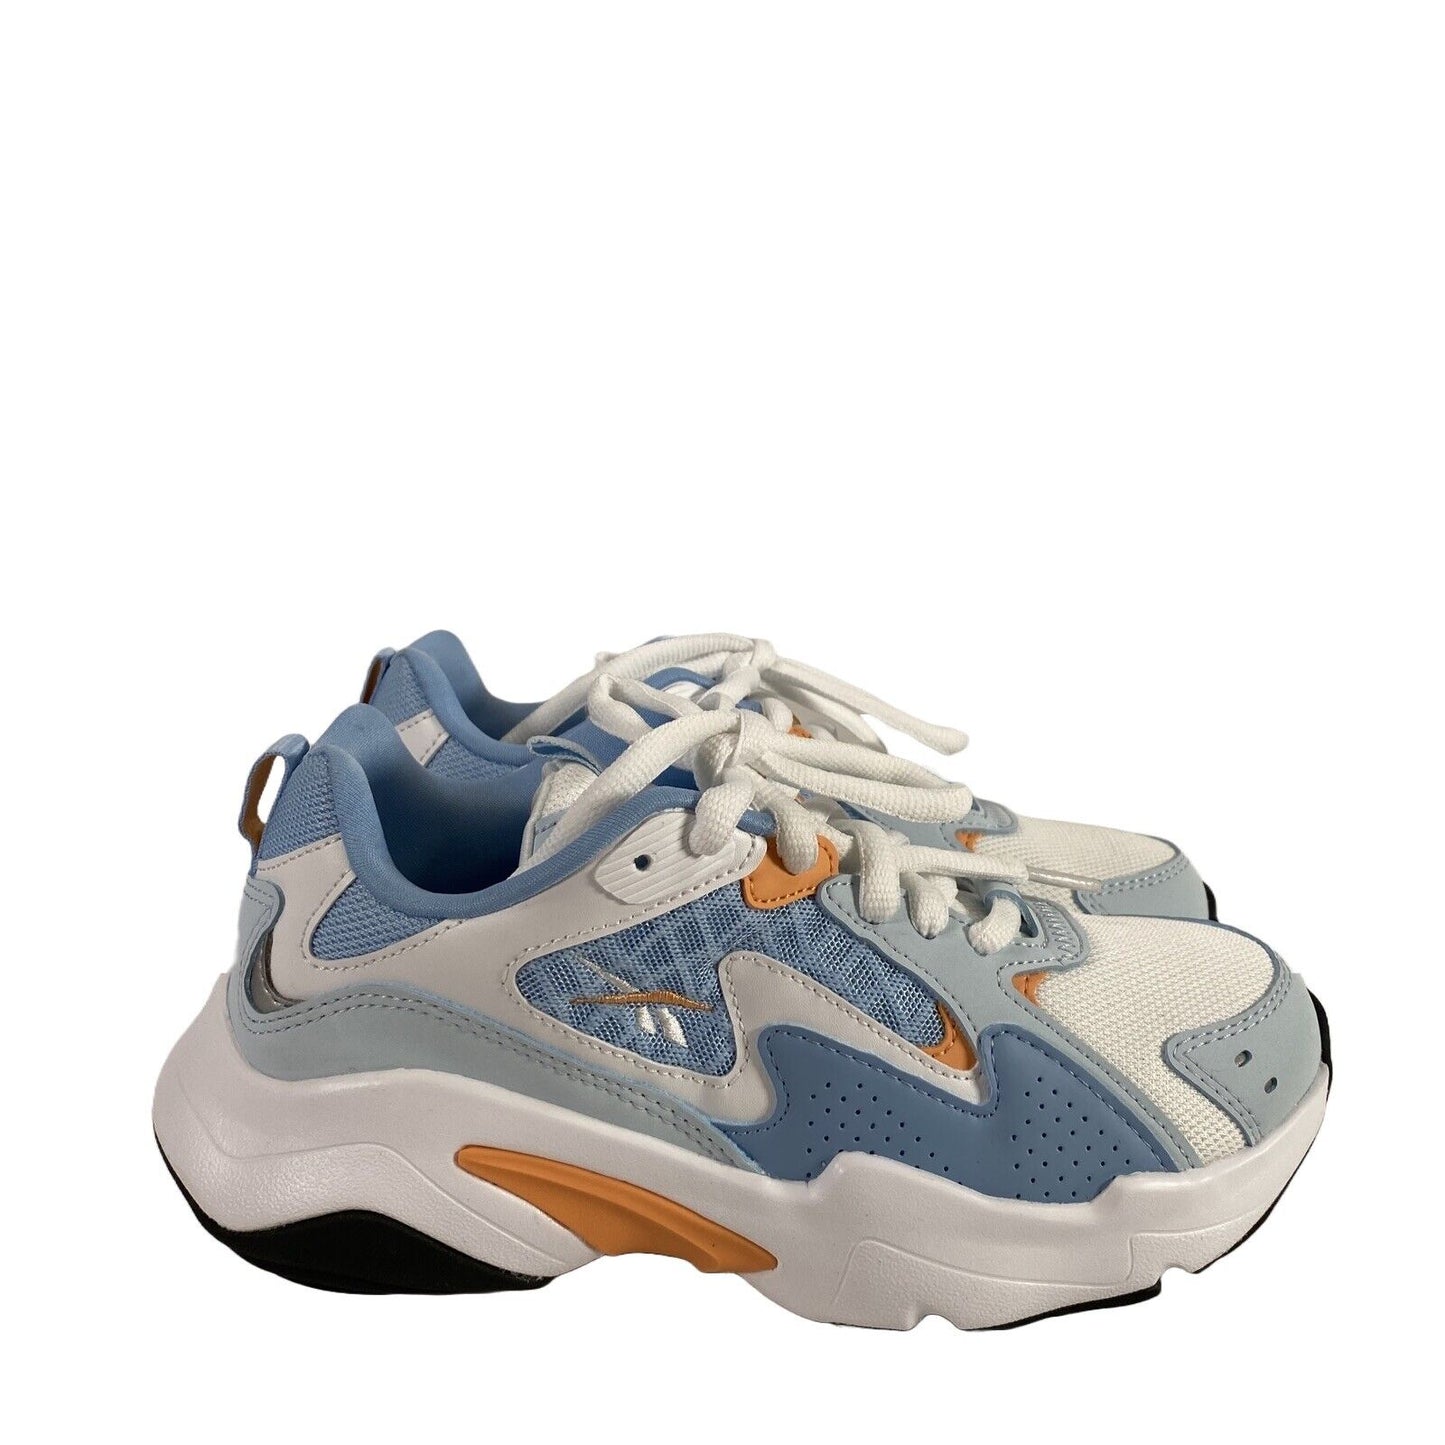 Reebok Men's White/Blue Zapatilla Lace Up Athletic Sneakers - 6.5